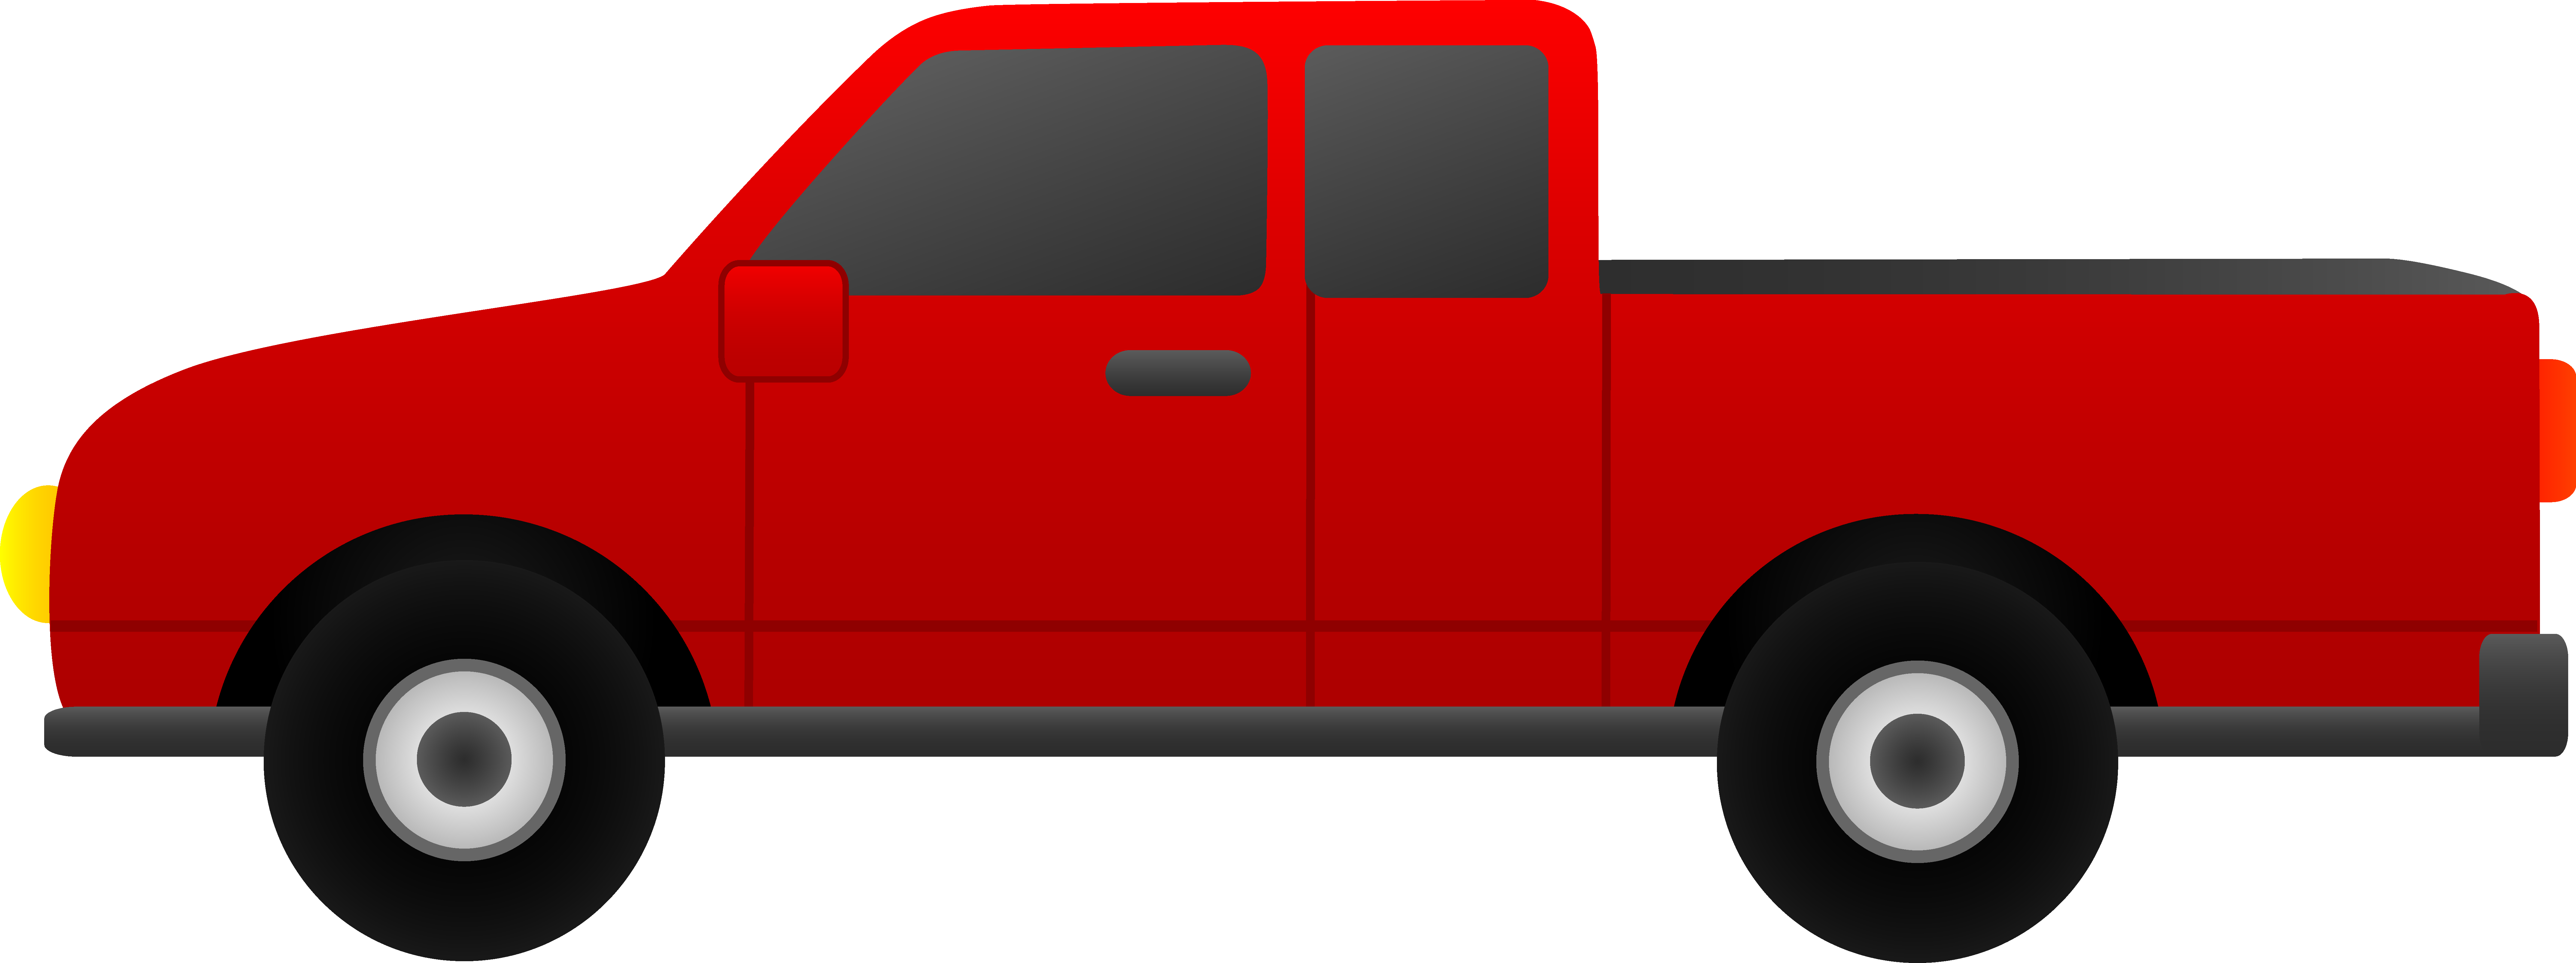 Pick Up Truck Clipart Top View | Clipart Panda - Free Clipart Images